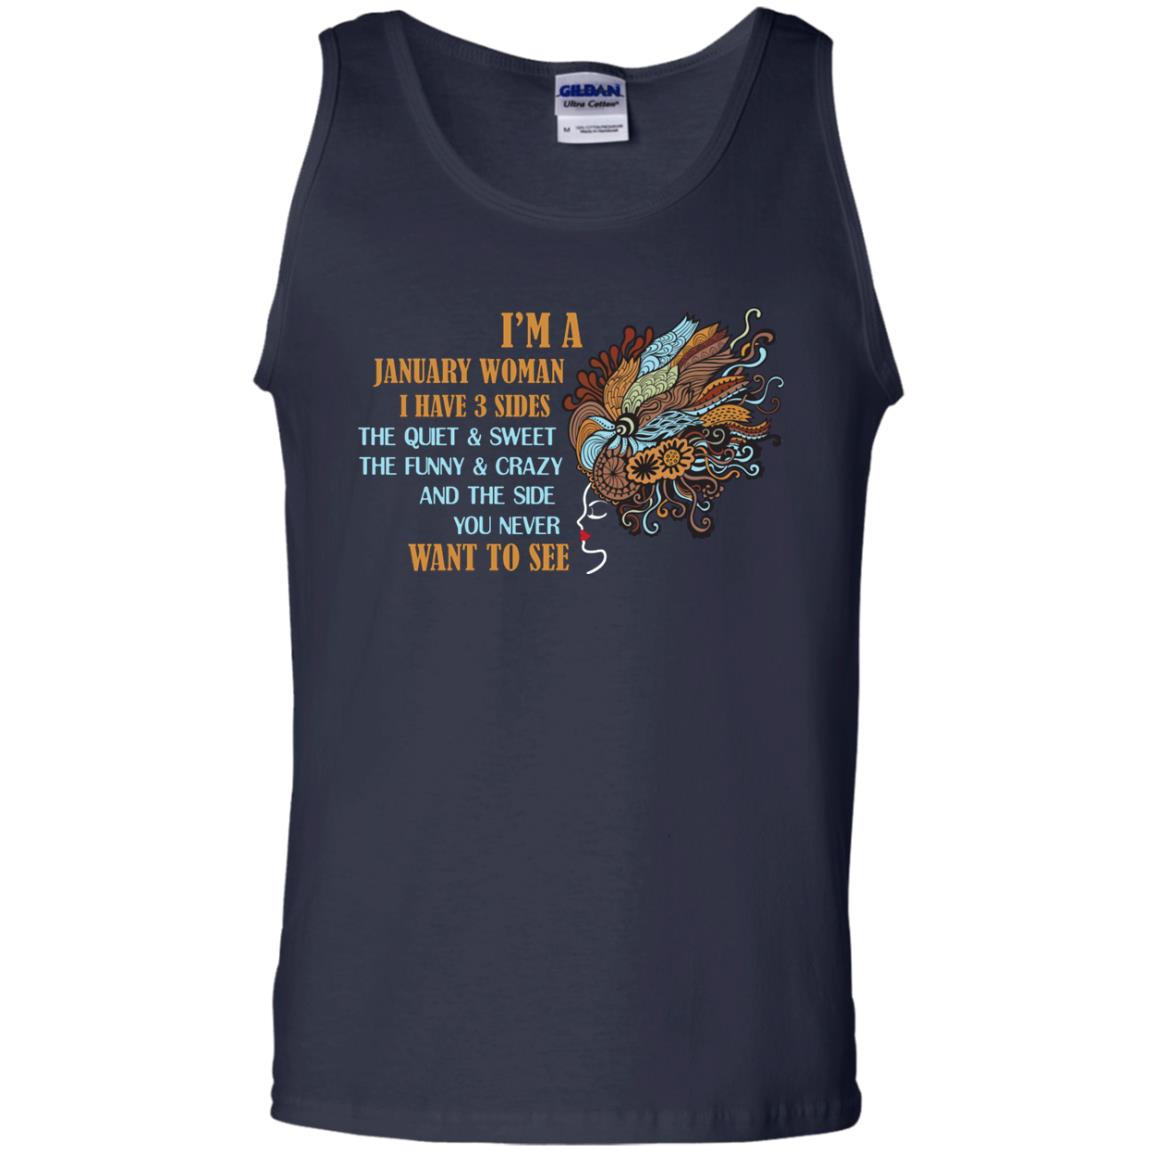 I'm A January Woman I Have 3 Sides The Quite And Sweet The Funny And Crazy And The Side You Never Want To SeeG220 Gildan 100% Cotton Tank Top